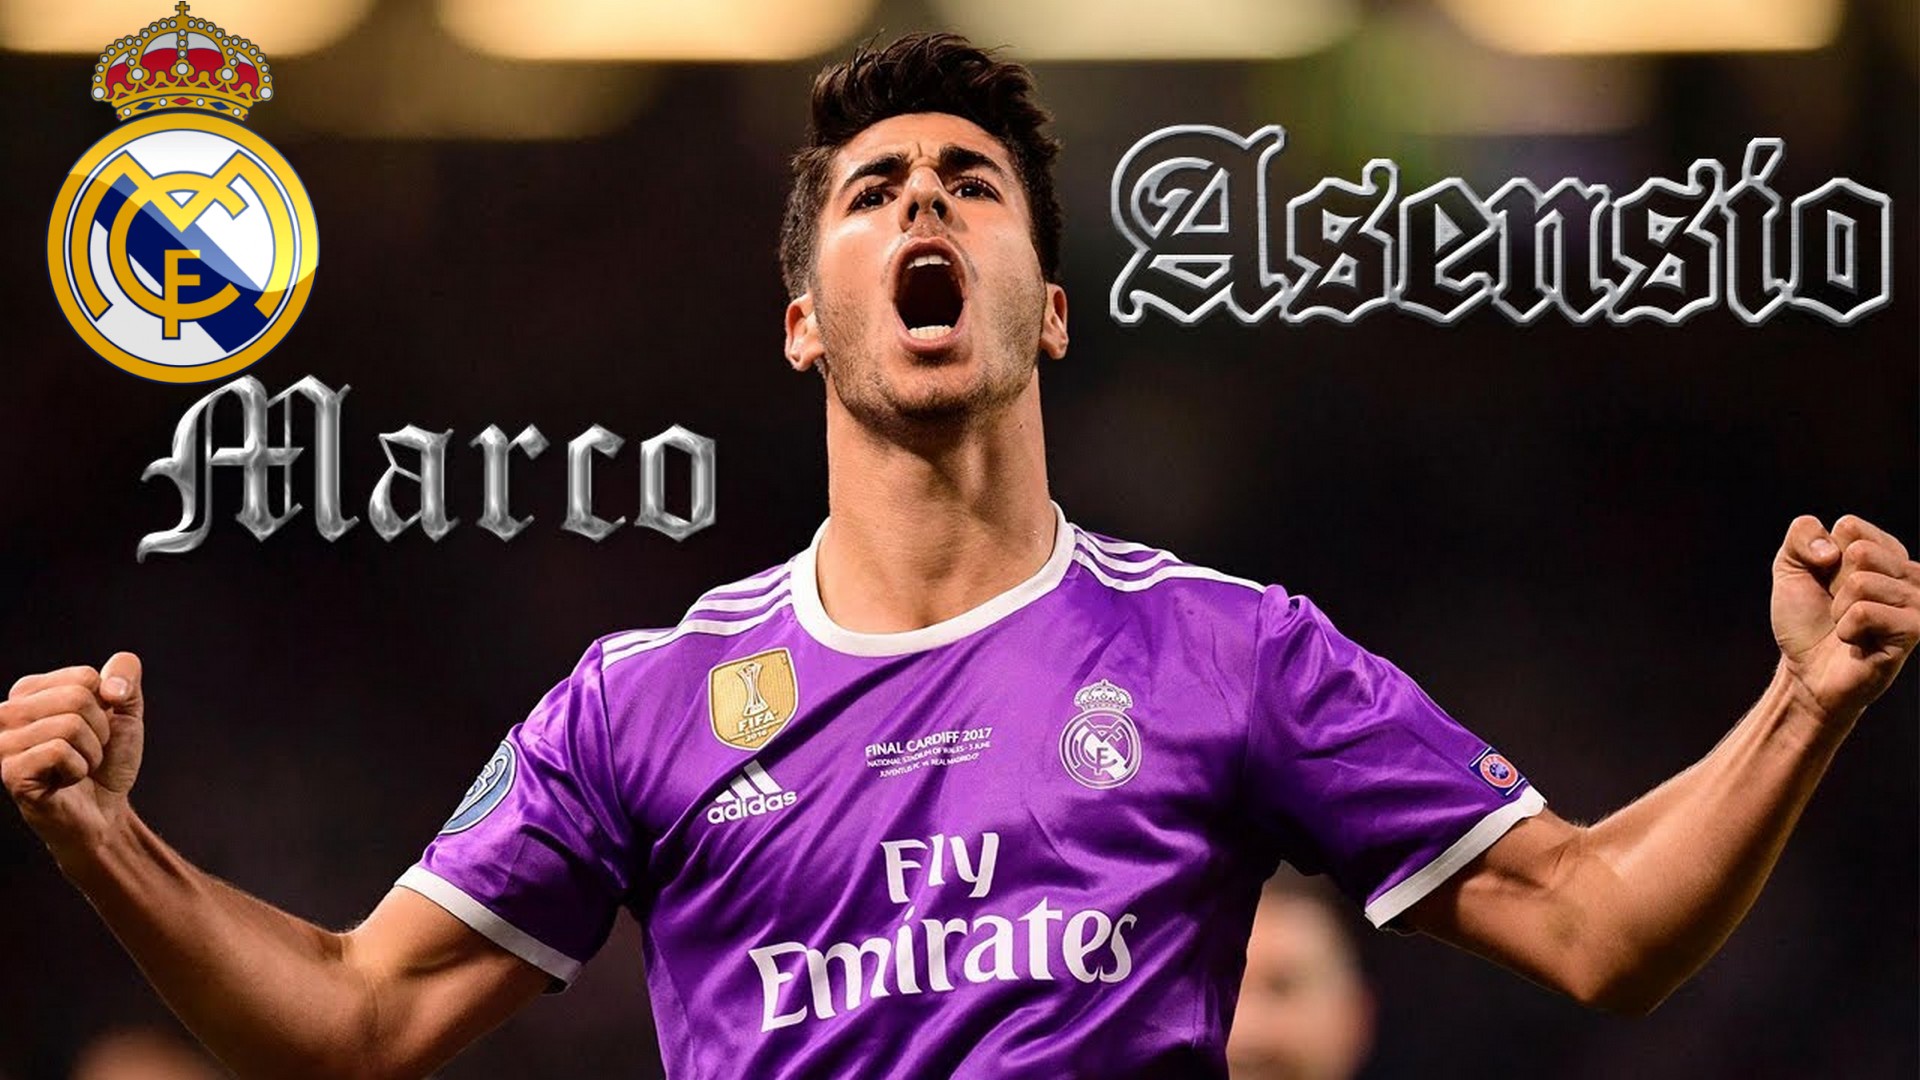 HD Marco Asensio Real Madrid Backgrounds With Resolution 1920X1080 pixel. You can make this wallpaper for your Mac or Windows Desktop Background, iPhone, Android or Tablet and another Smartphone device for free